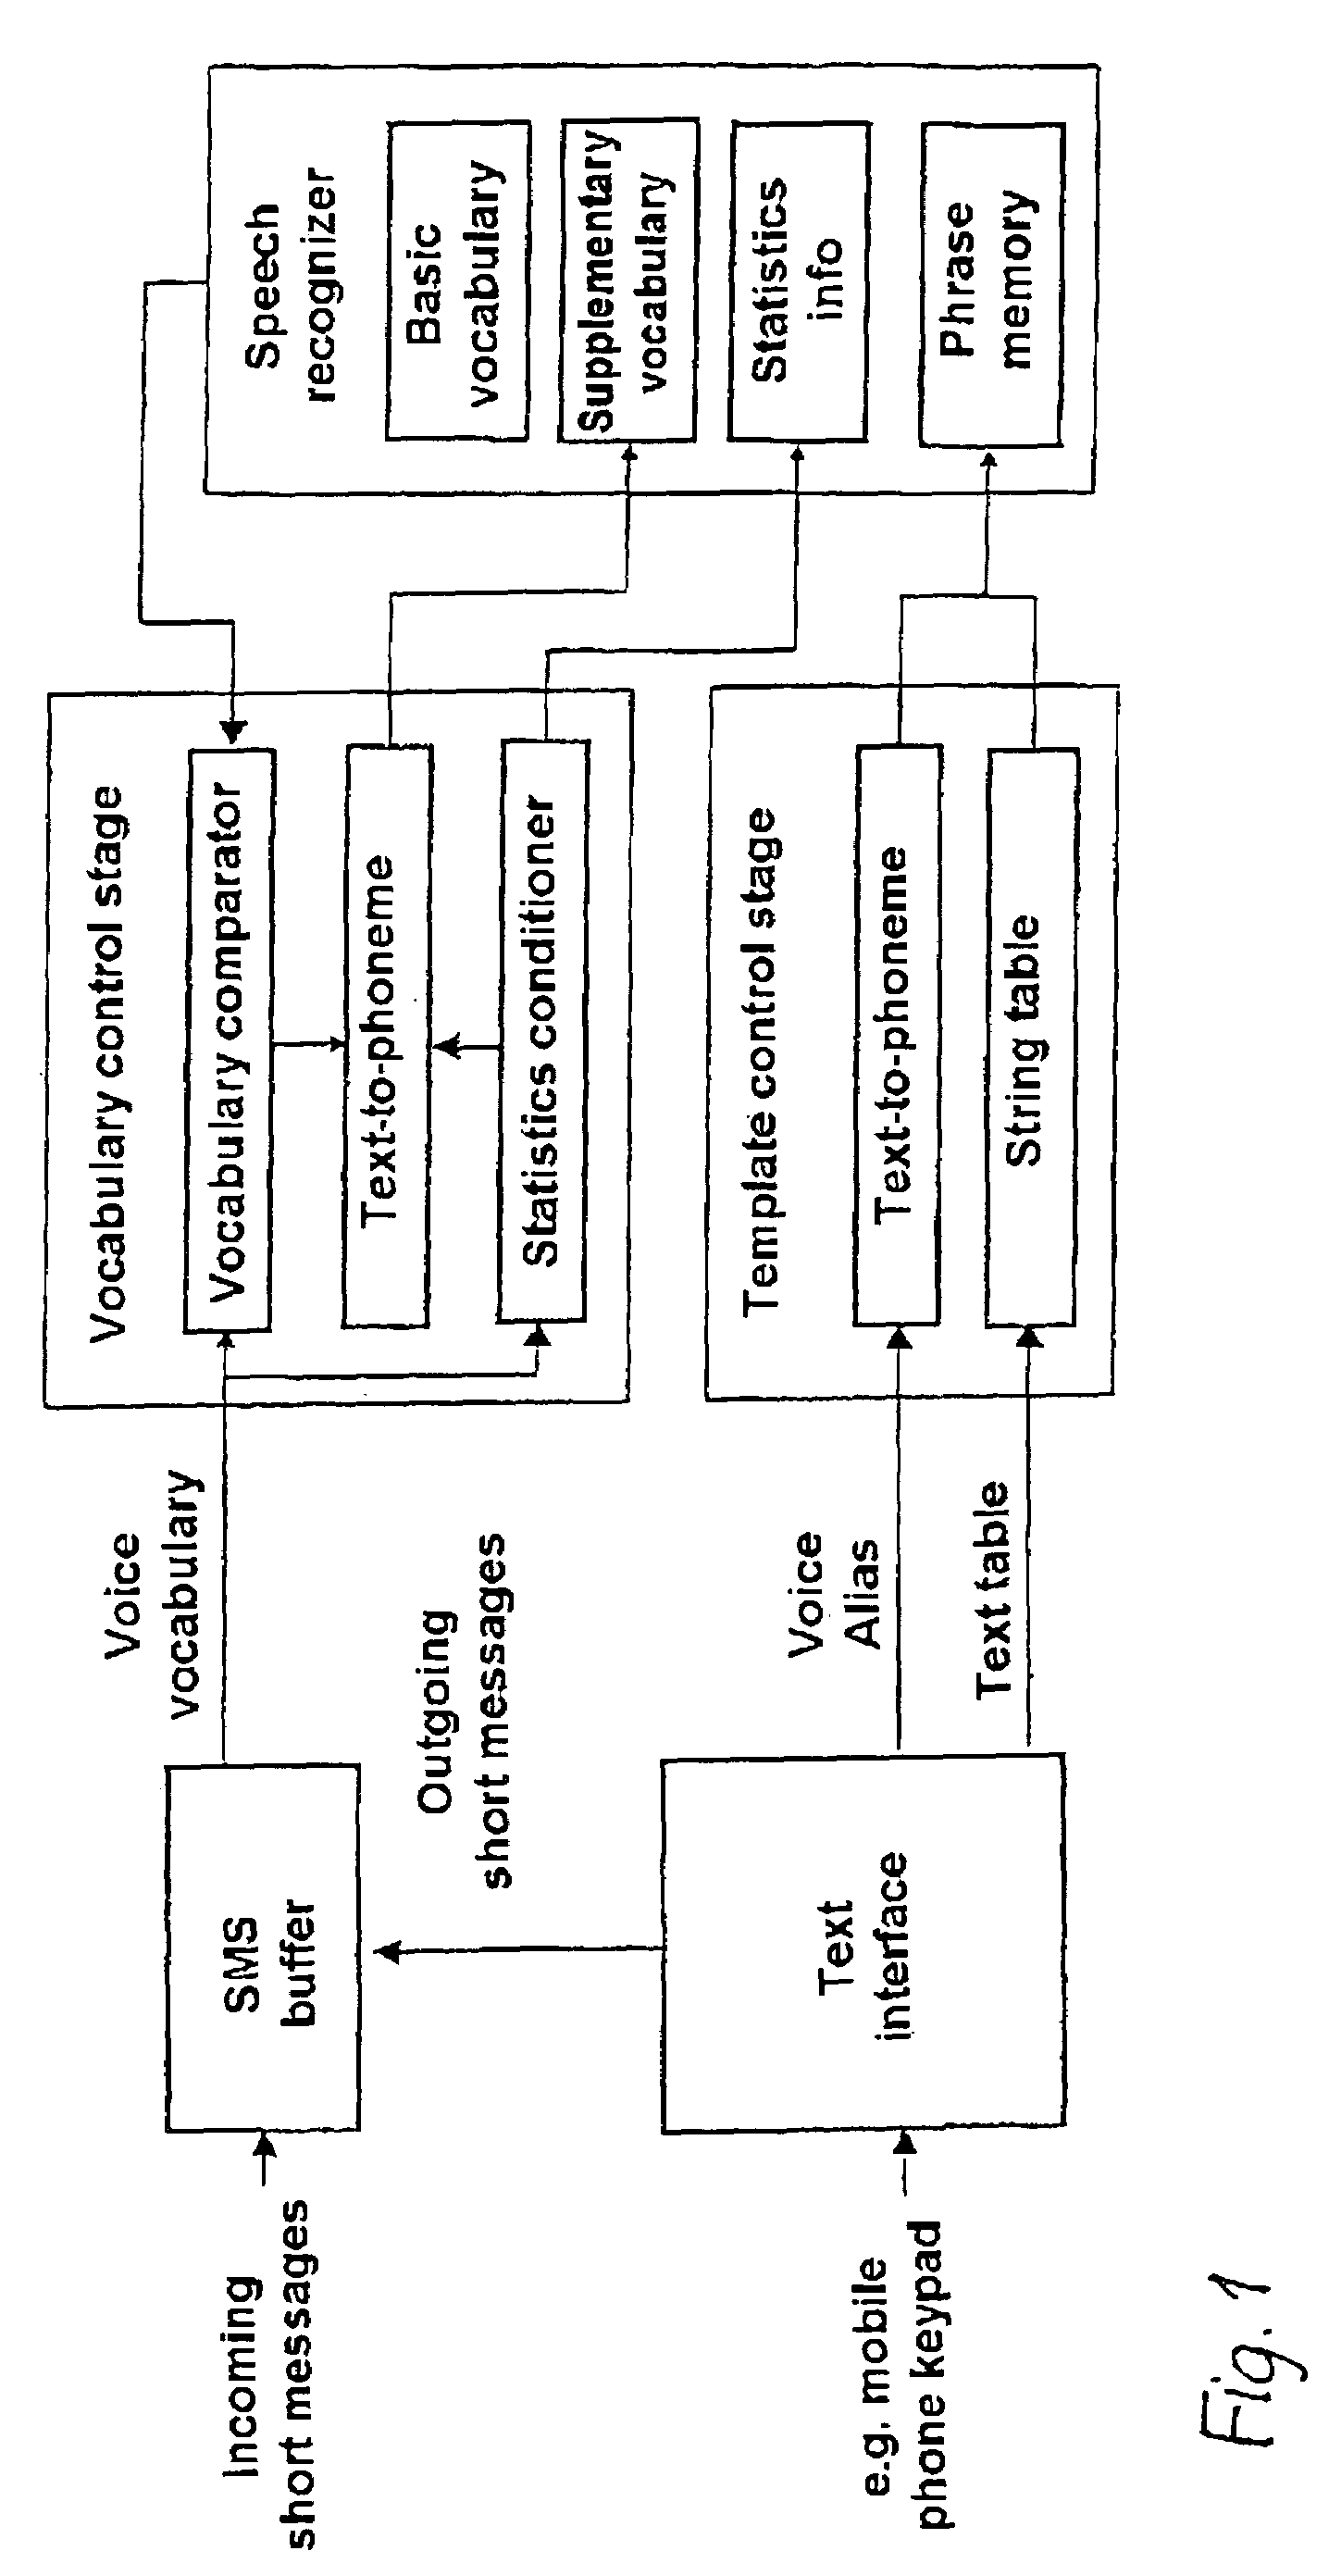 Speech recognition system and method for operating same